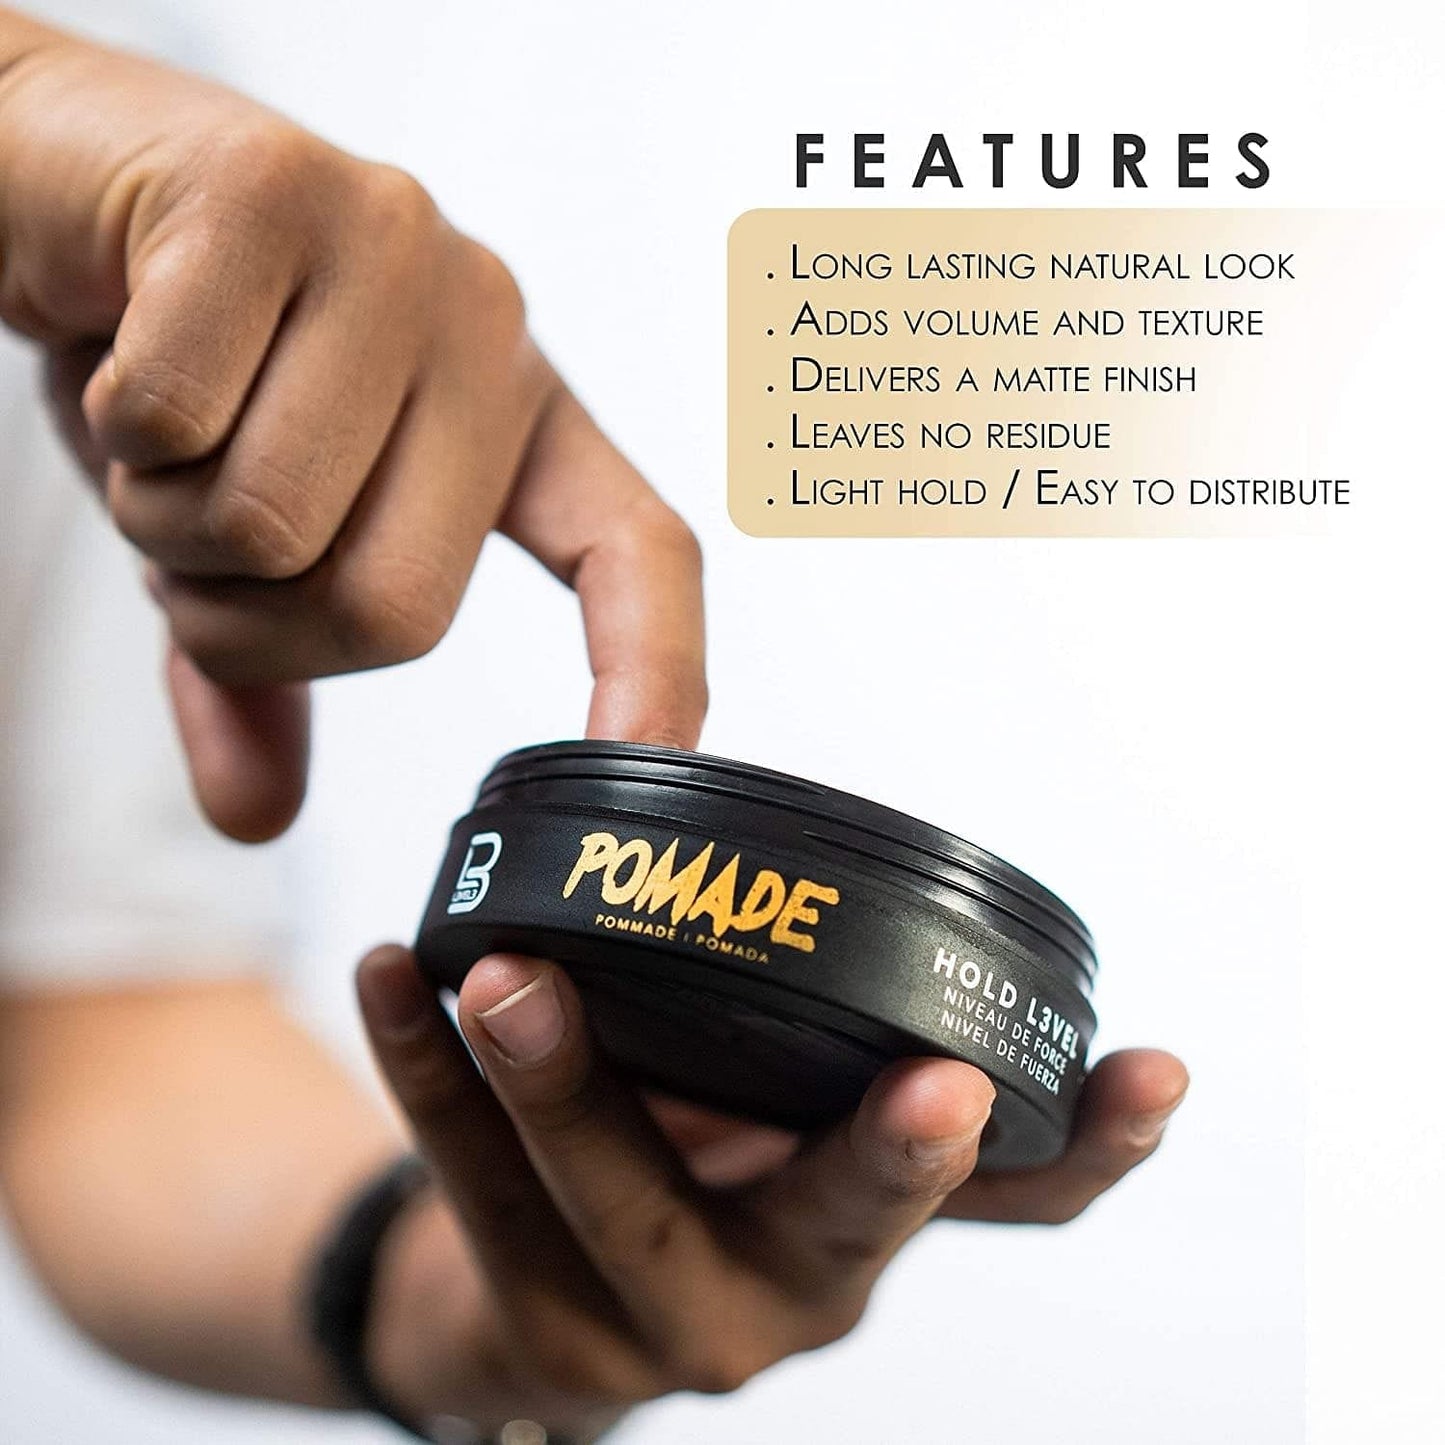 Level 3 Pomade Improves Hair Strength and Volume L3 Long-Lasting Hold Infused Keratin Level 150 ML - Goldy TV